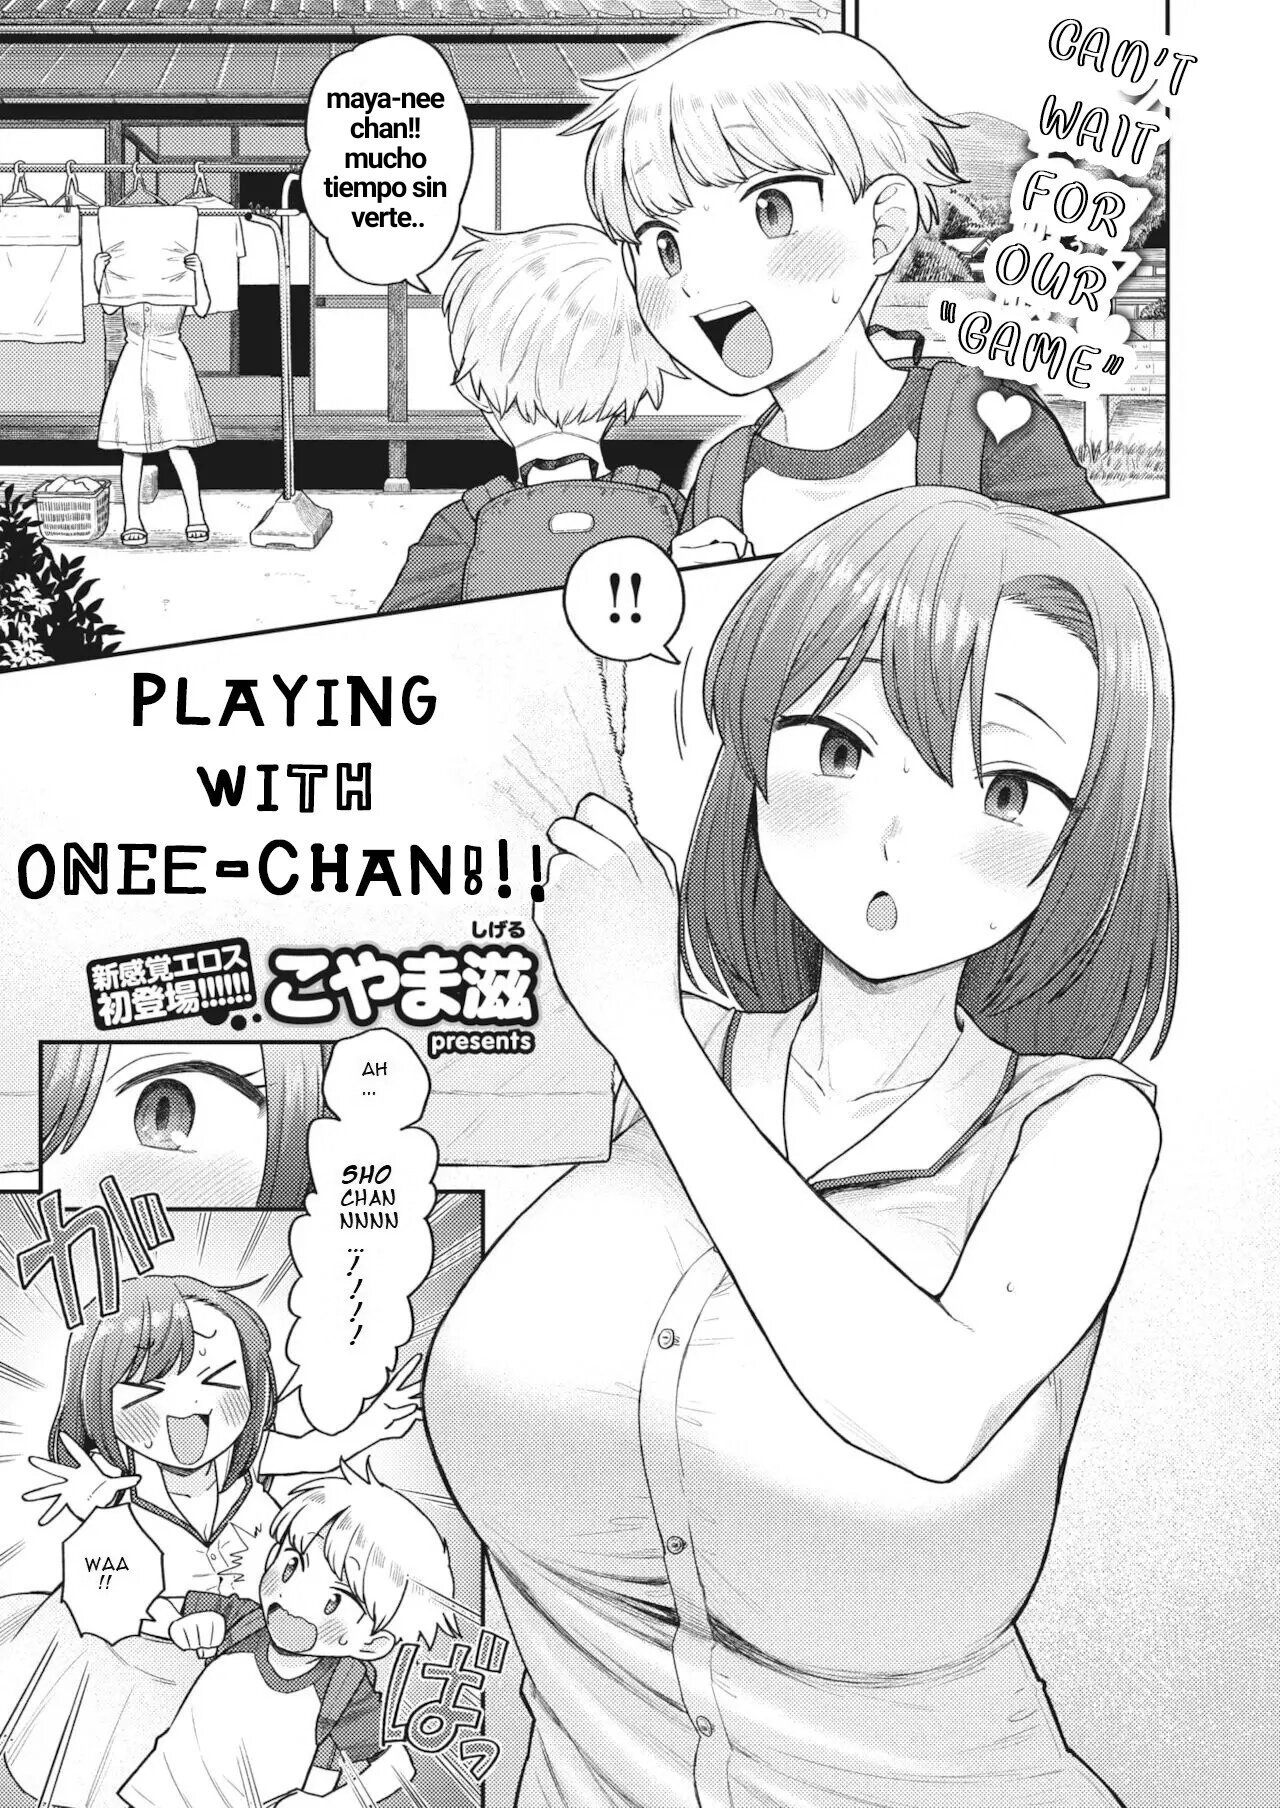 Playing with Onee-chan!!! - 0